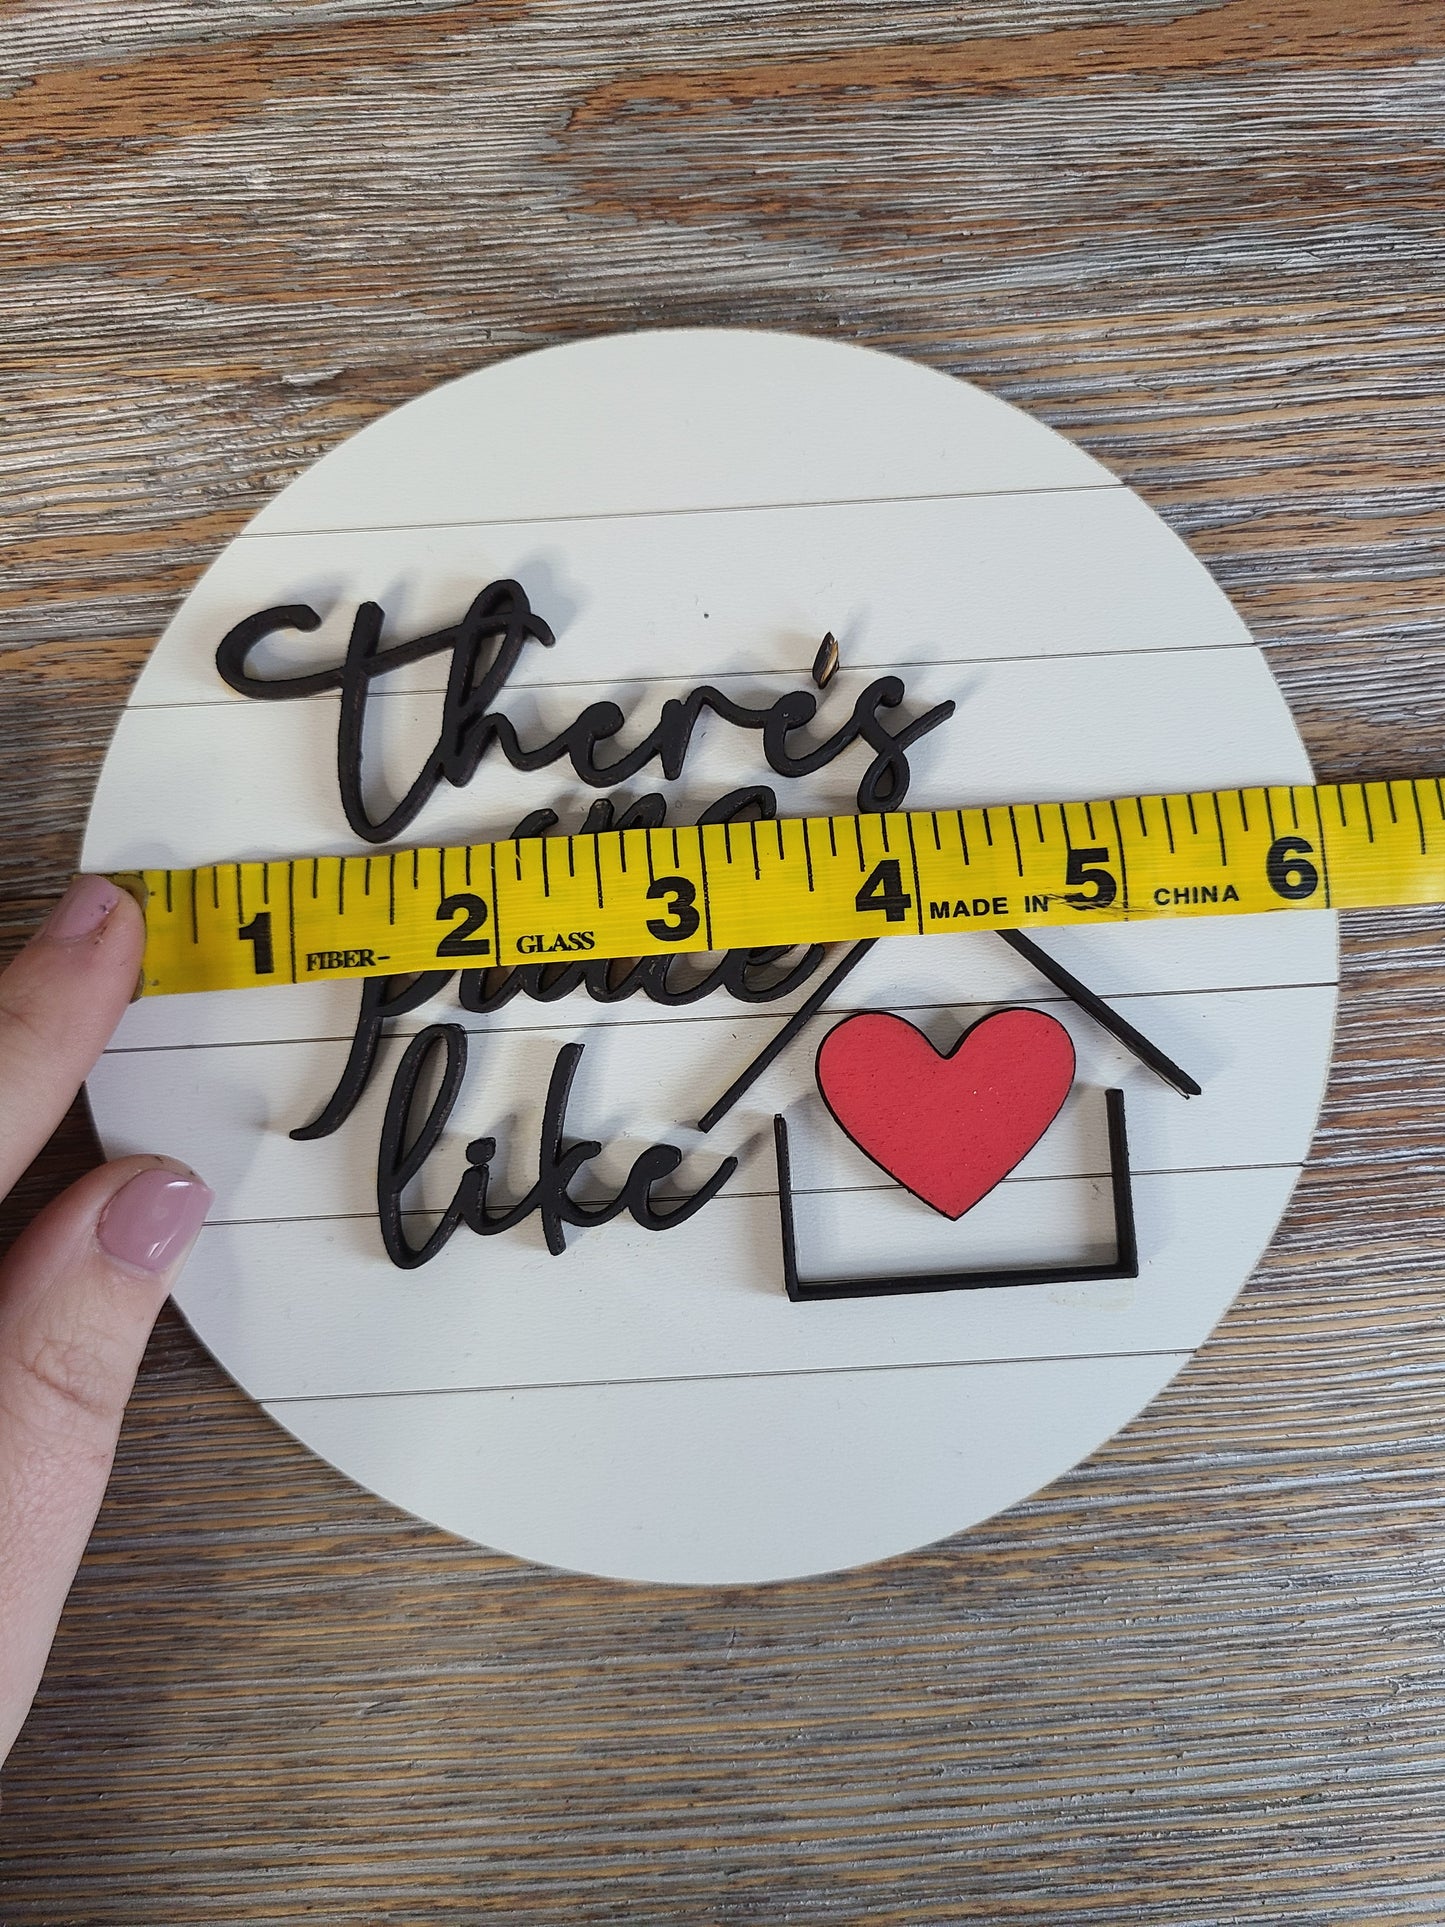 There's No Place Like Home Sign with or without Interchangeable Tabletop Sign Holder